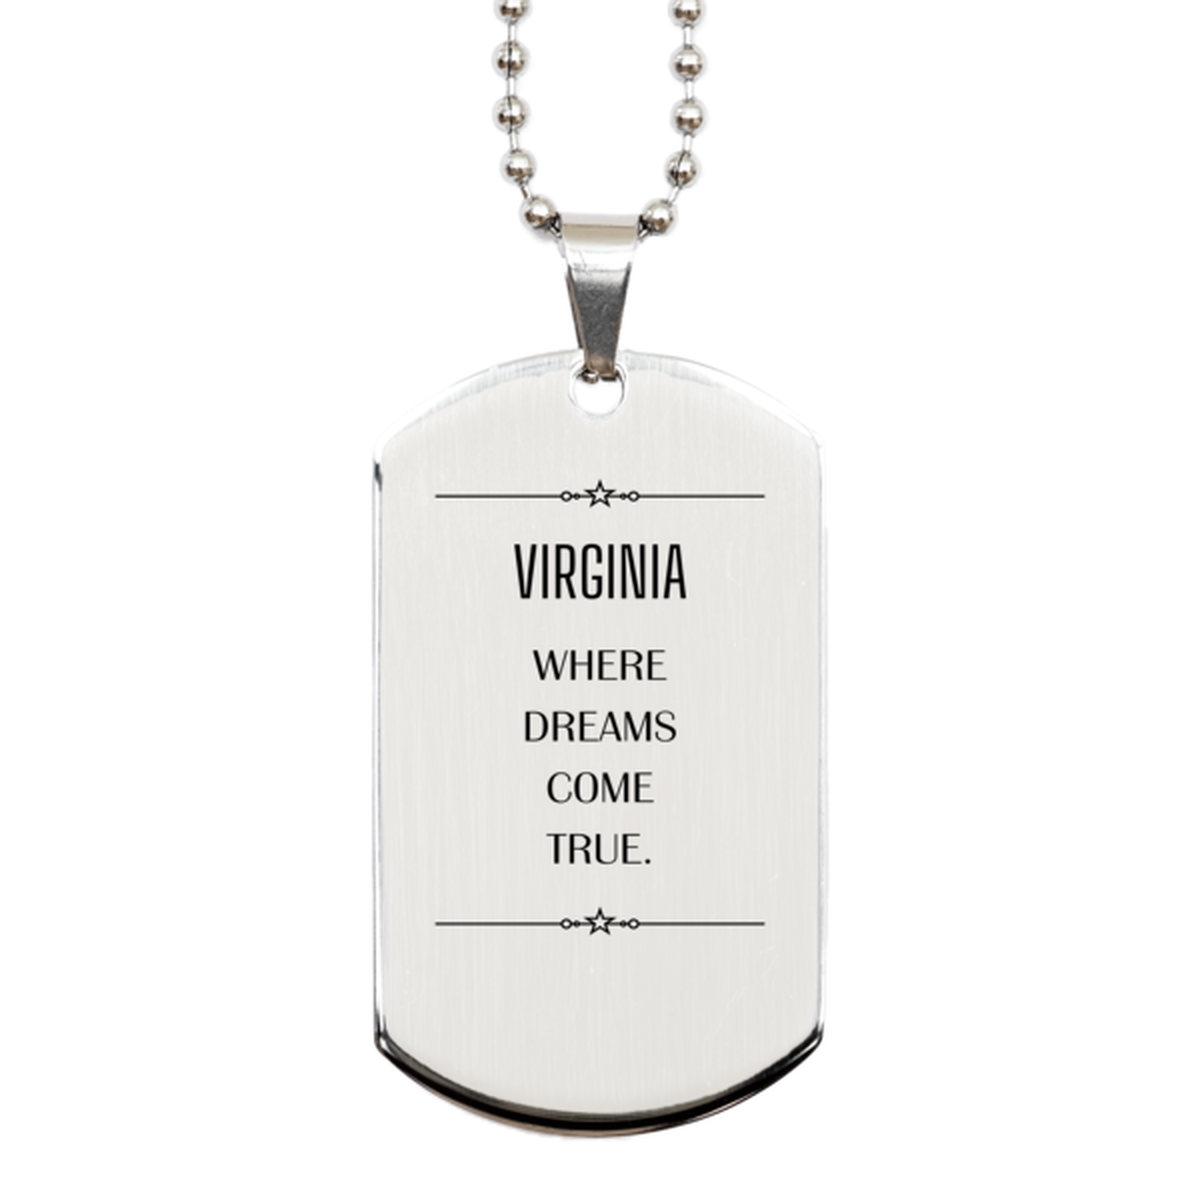 Love Virginia State Silver Dog Tag, Virginia Where dreams come true, Birthday Inspirational Gifts For Virginia Men, Women, Friends